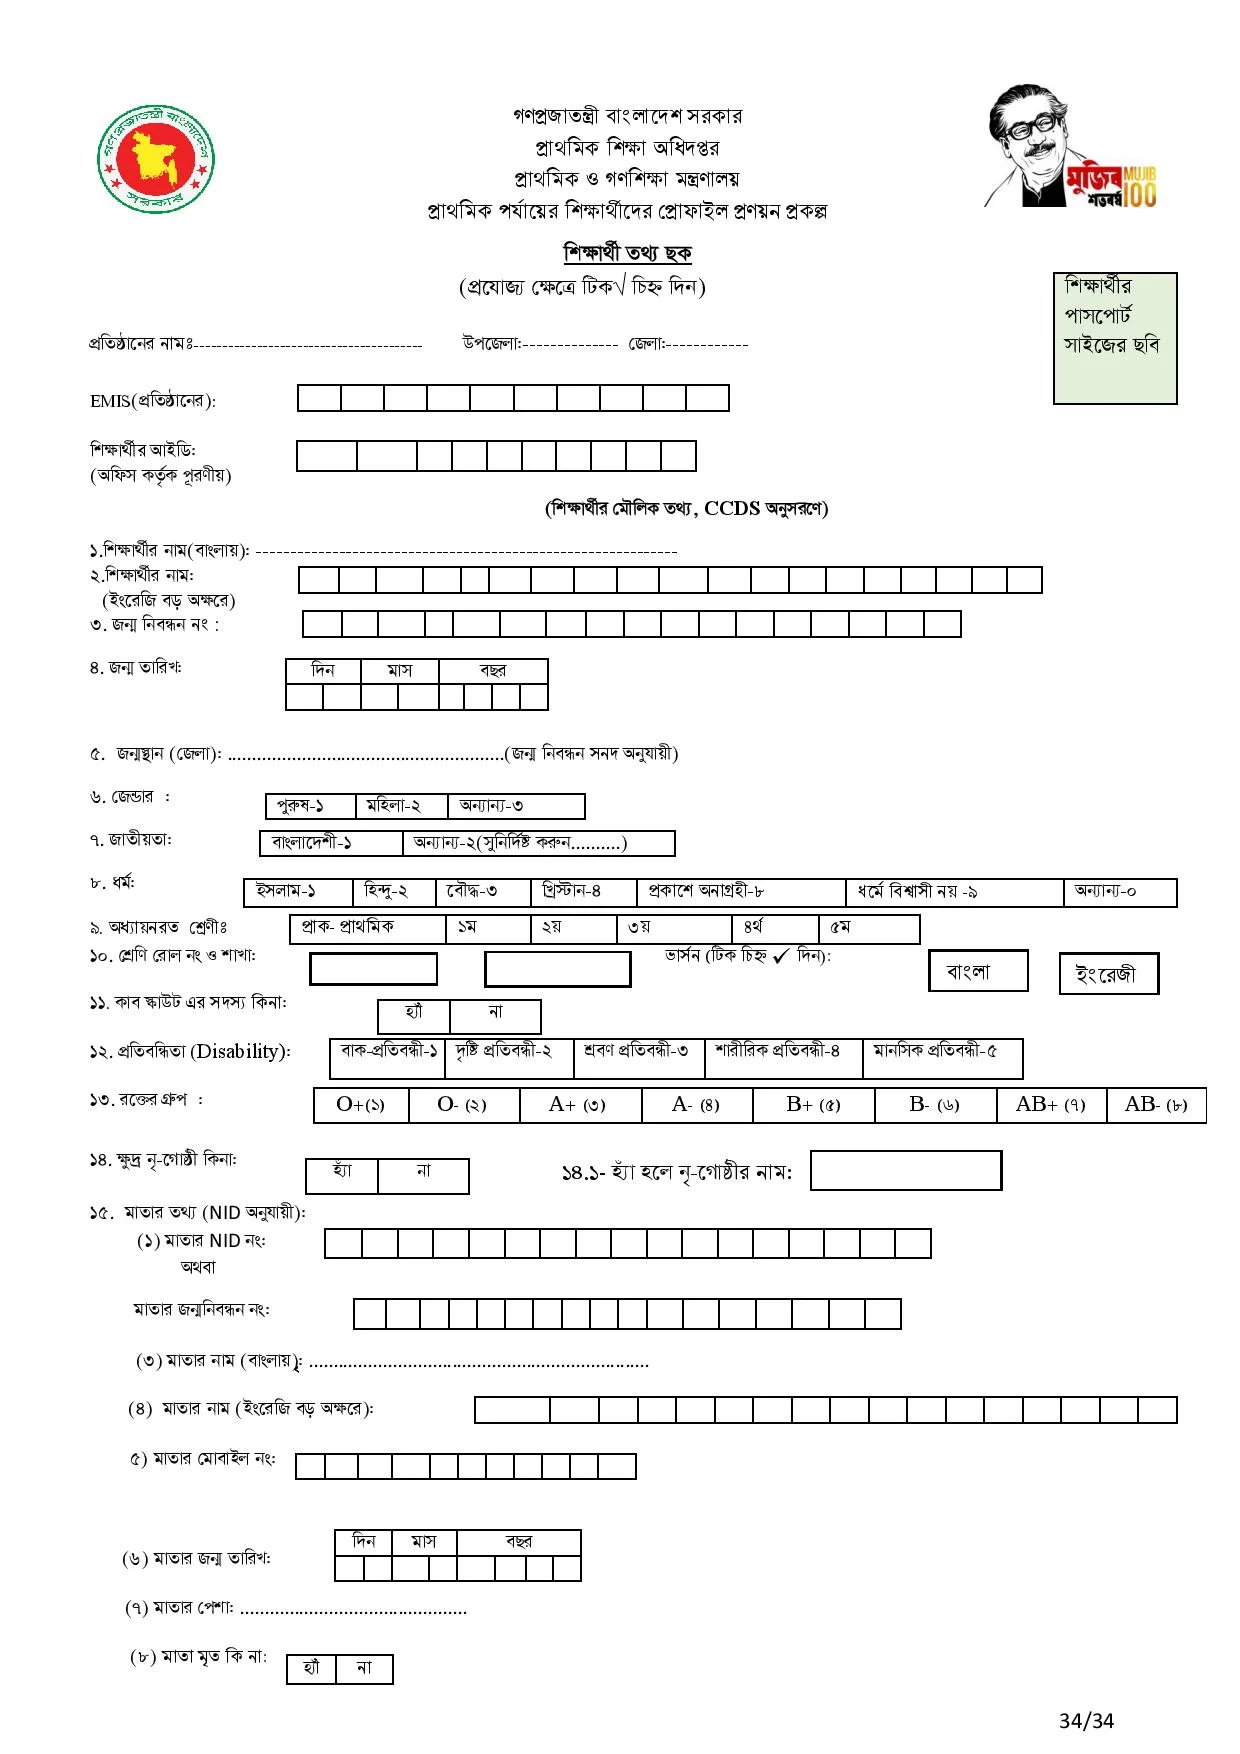 Primary School Student Profile Form Download